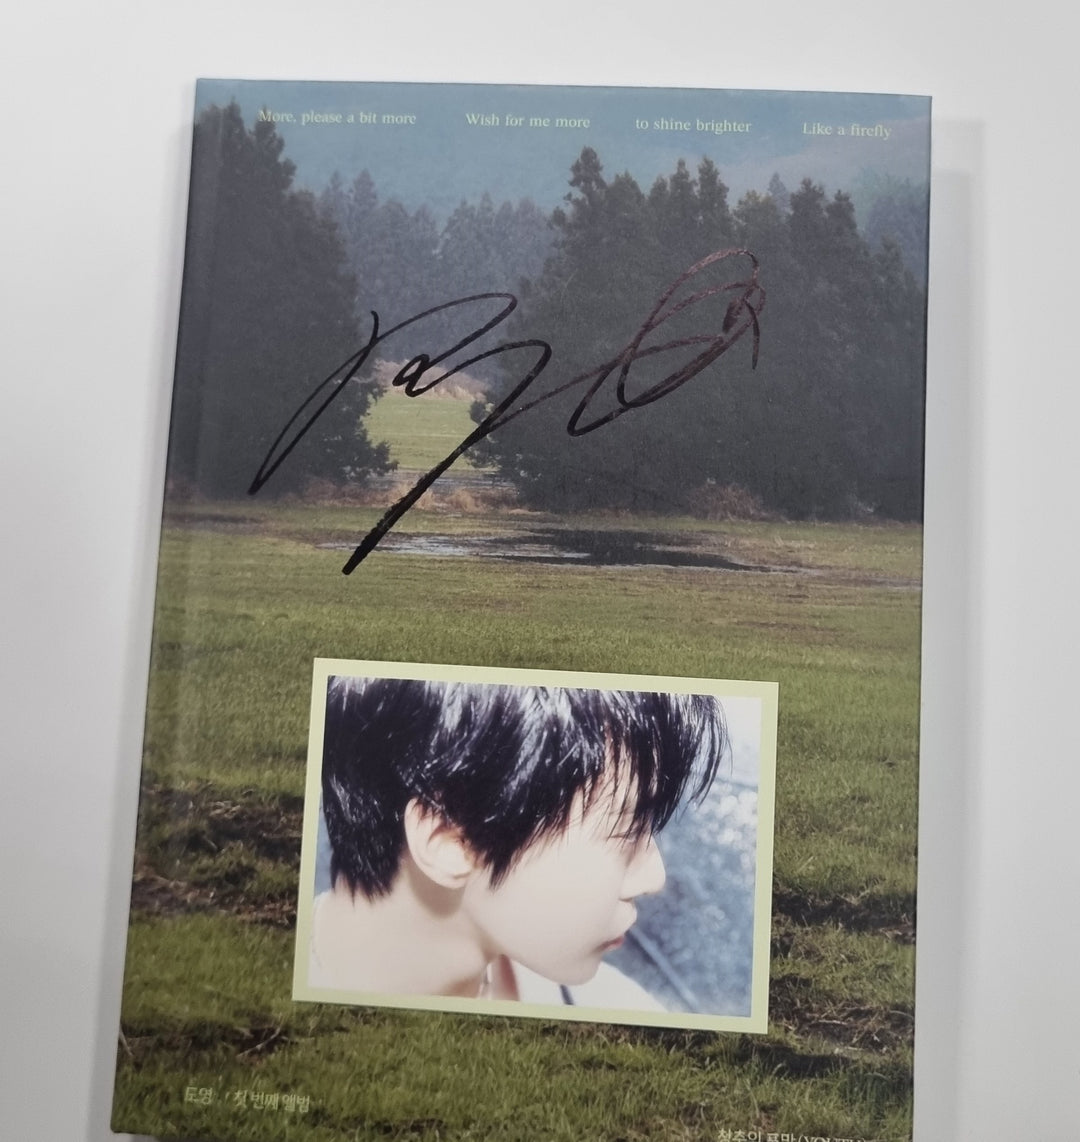 DOYOUNG "YOUTH" - Hand Autographed(Signed) Promo Album [24.5.7]